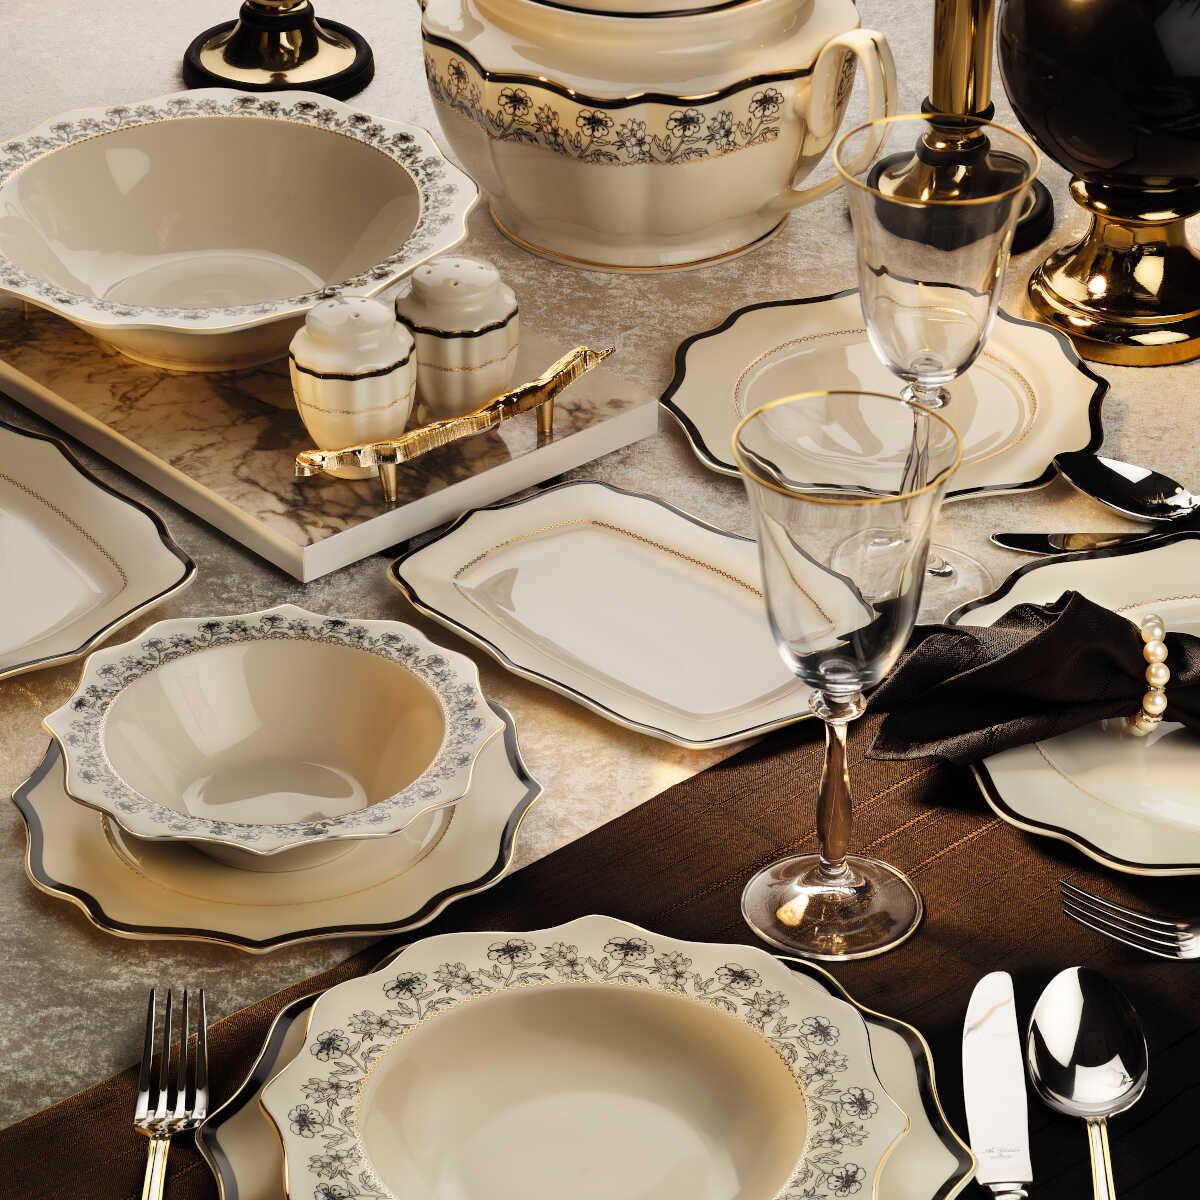 Royal London Daffodil 60 Piece Dinner Set for 12 People